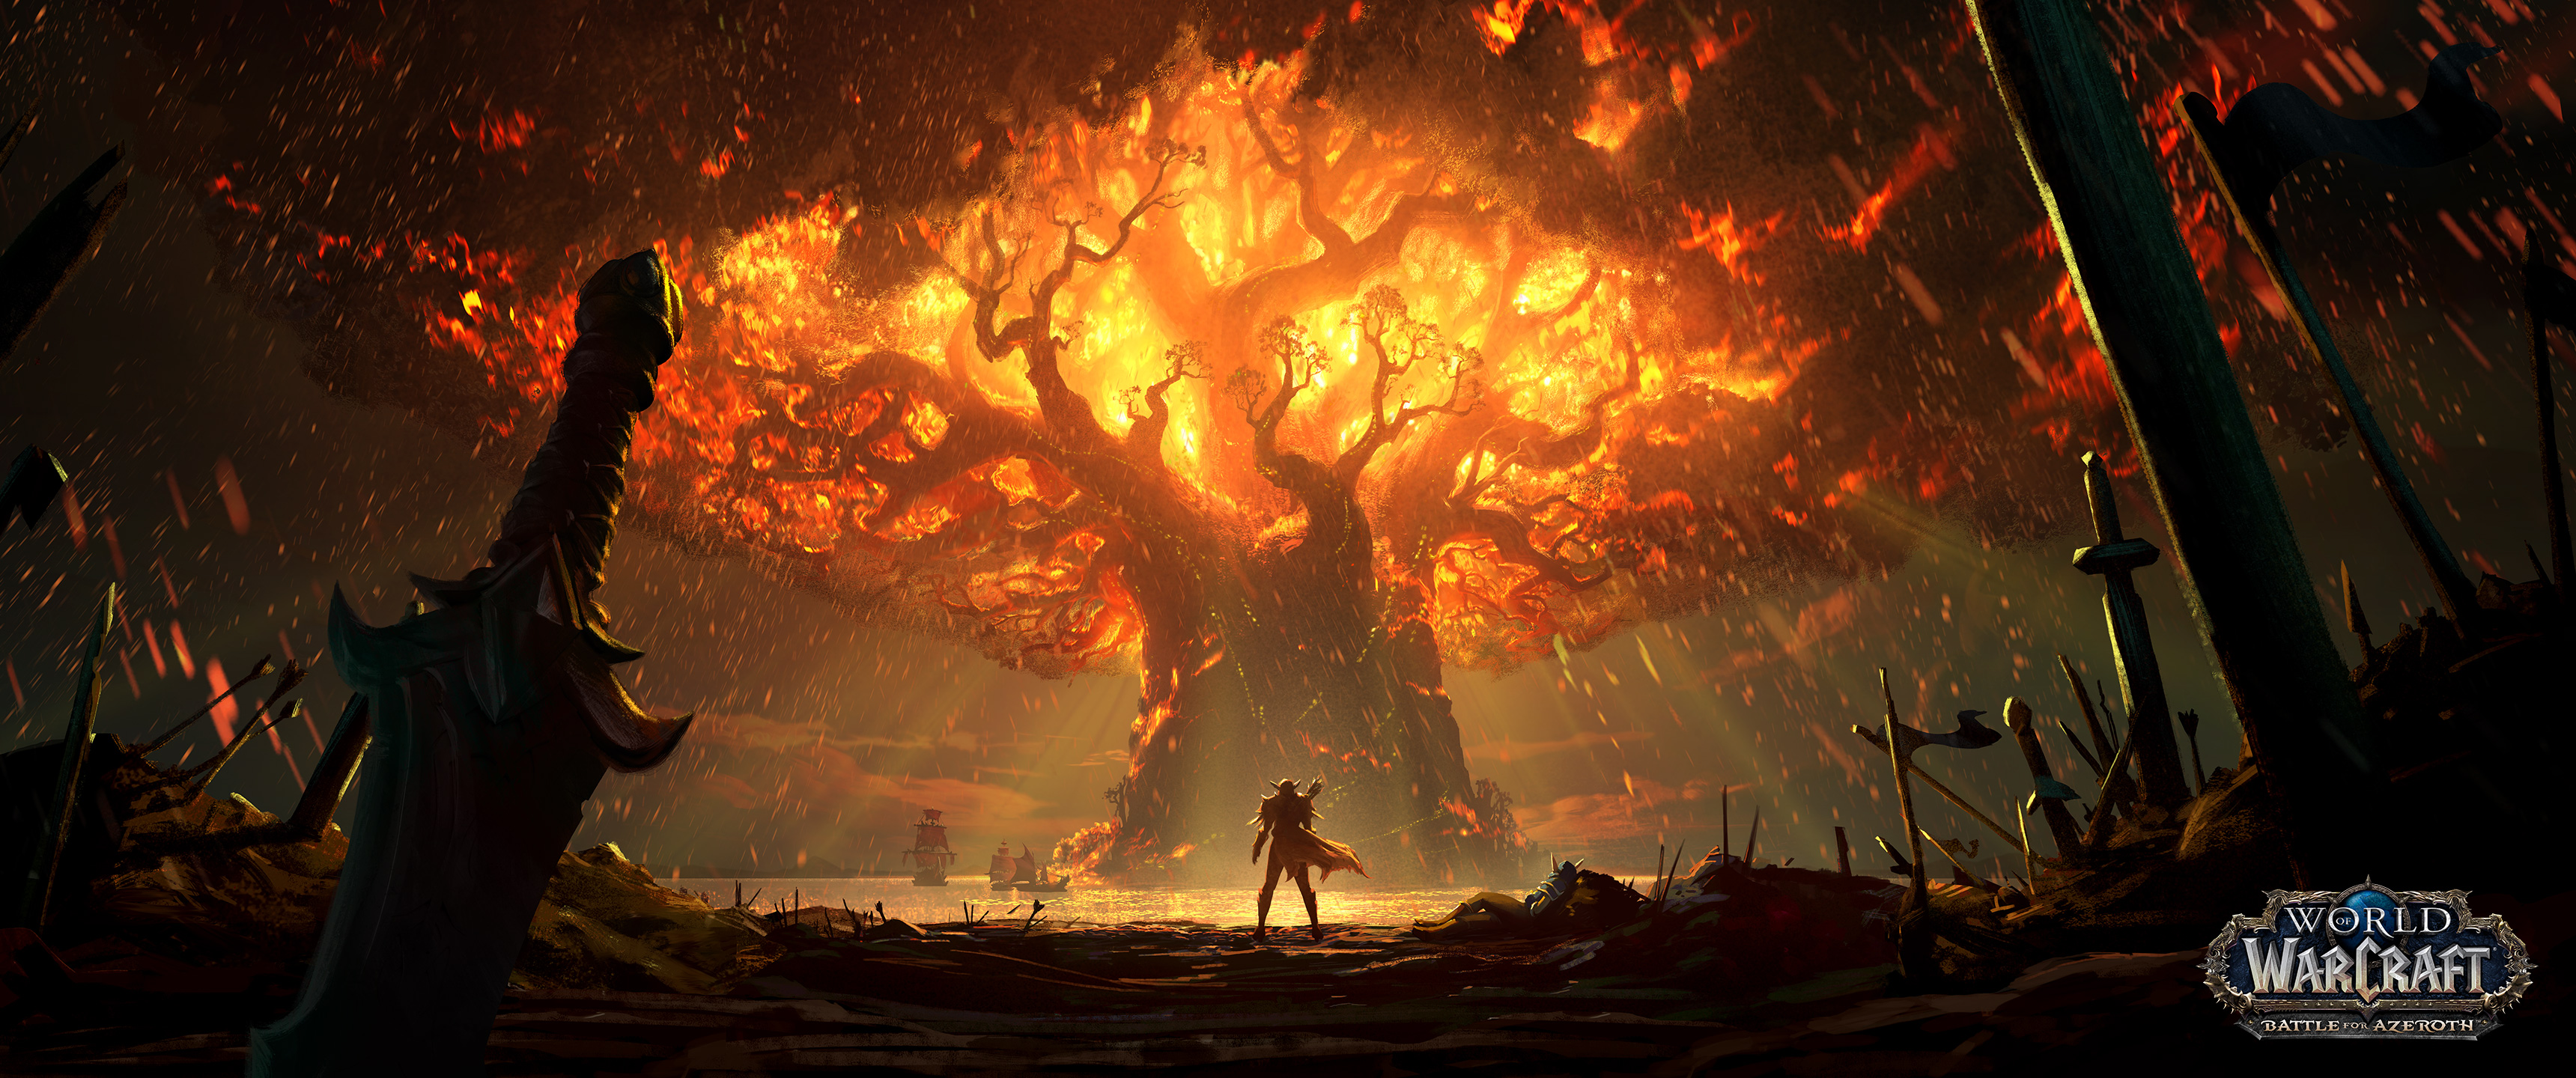 General 3440x1440 World of Warcraft PC gaming World of Warcraft: Battle for Azeroth video game art trees fire fantasy art digital art ultrawide